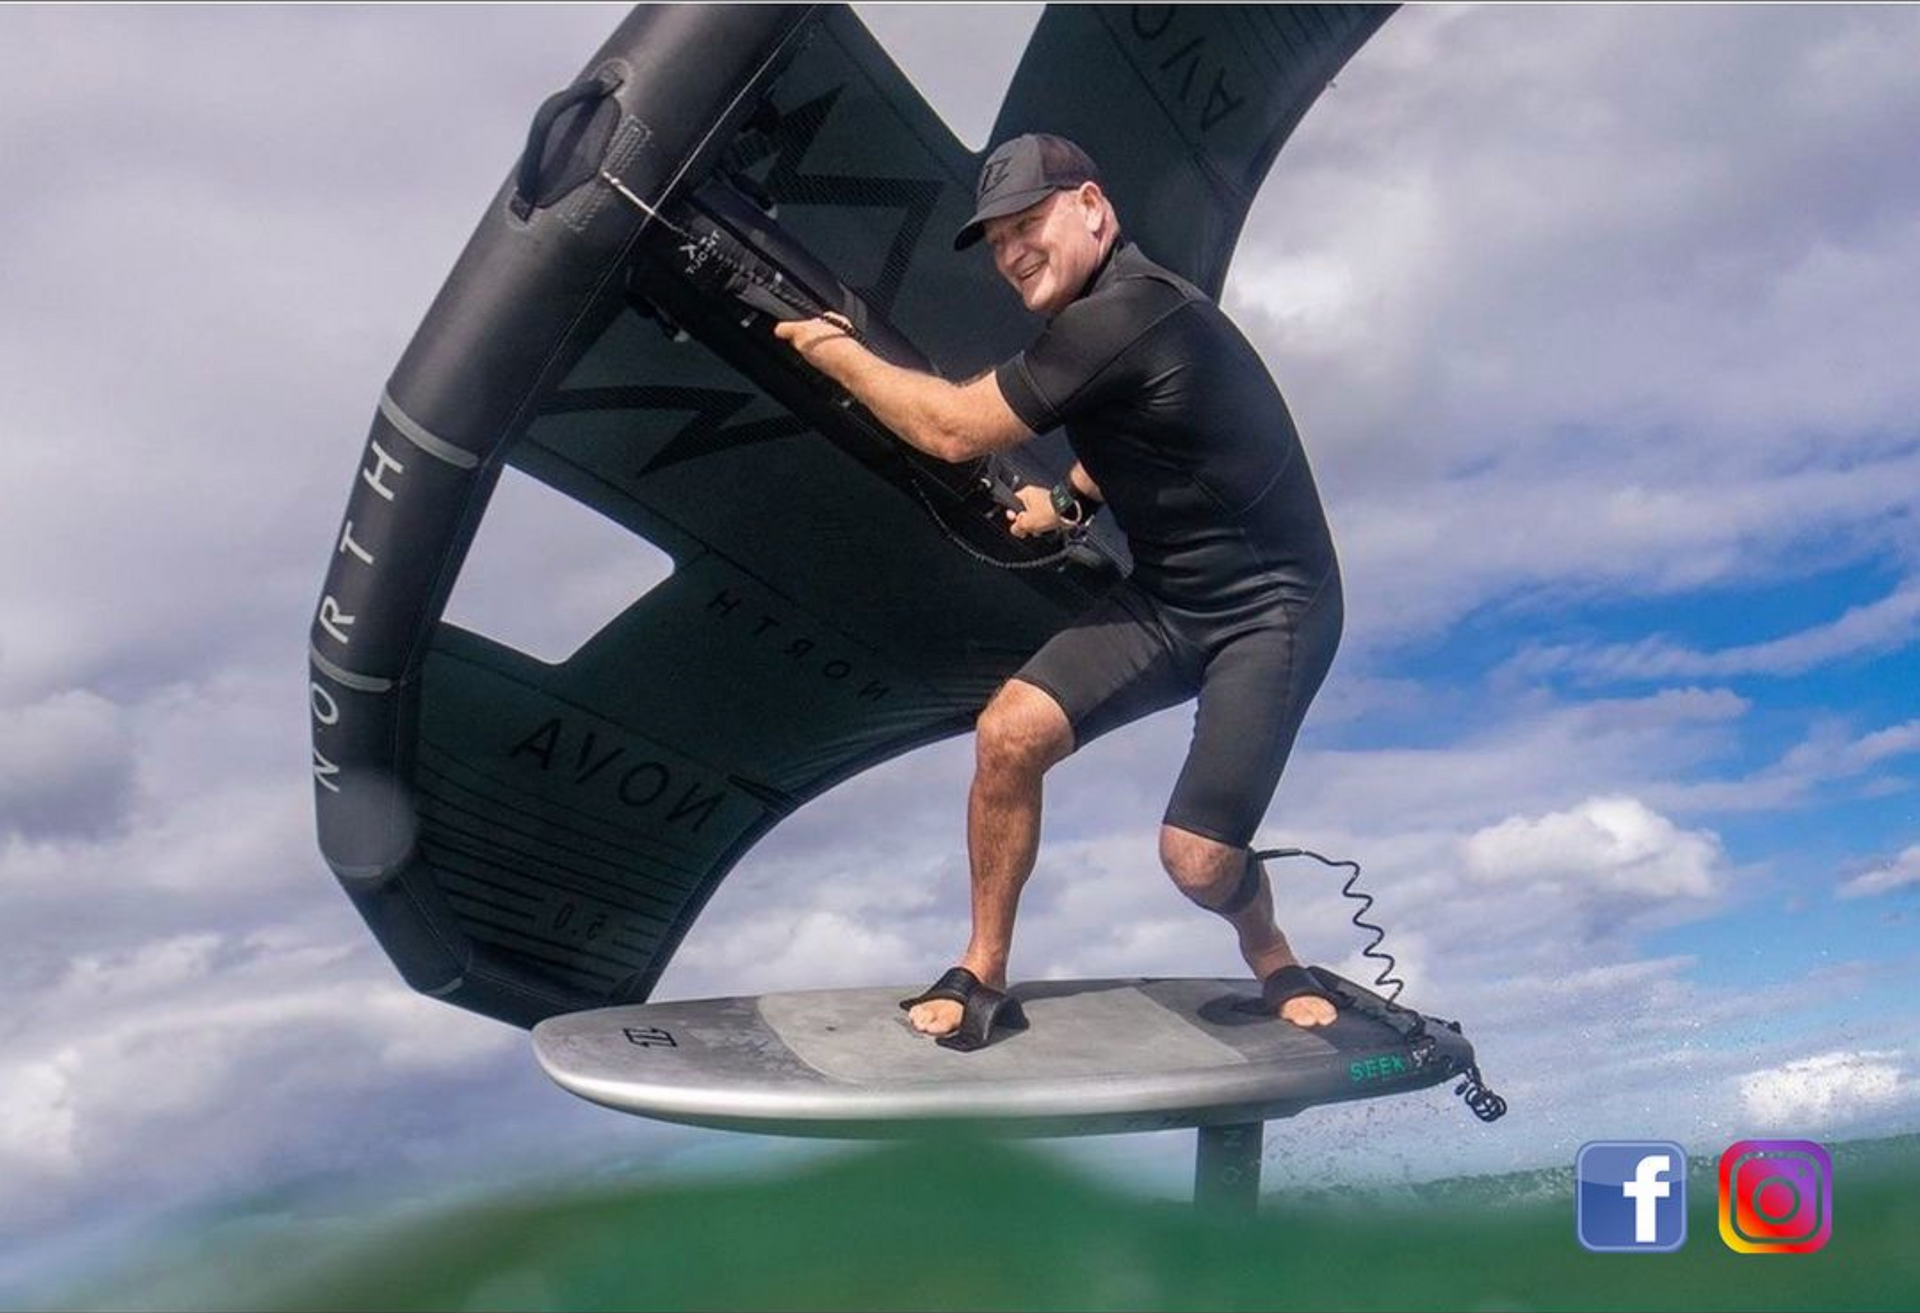 Podcast: North Foiling - Mike Raper